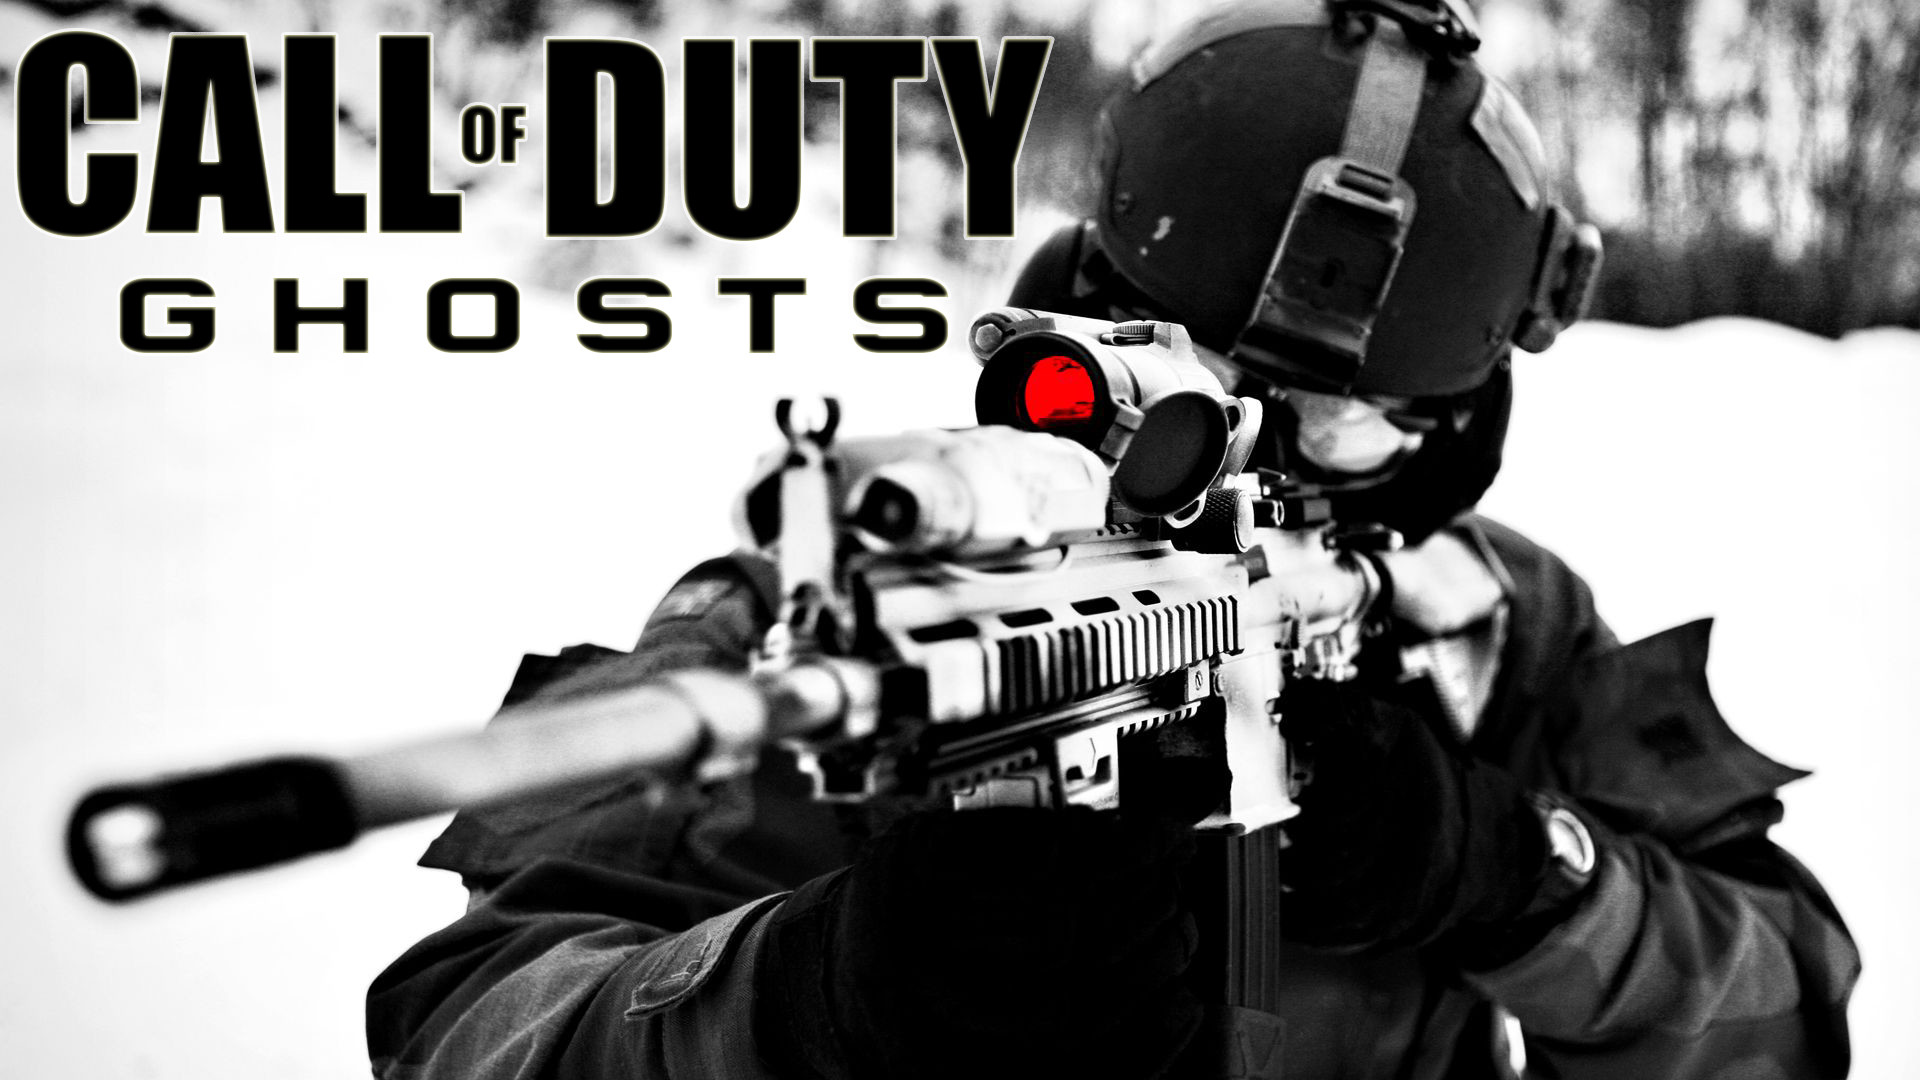 call-of-duty-ghosts-21232-1680×1050 | Call of Duty Ghosts Wallpaper |  Pinterest | Wallpaper